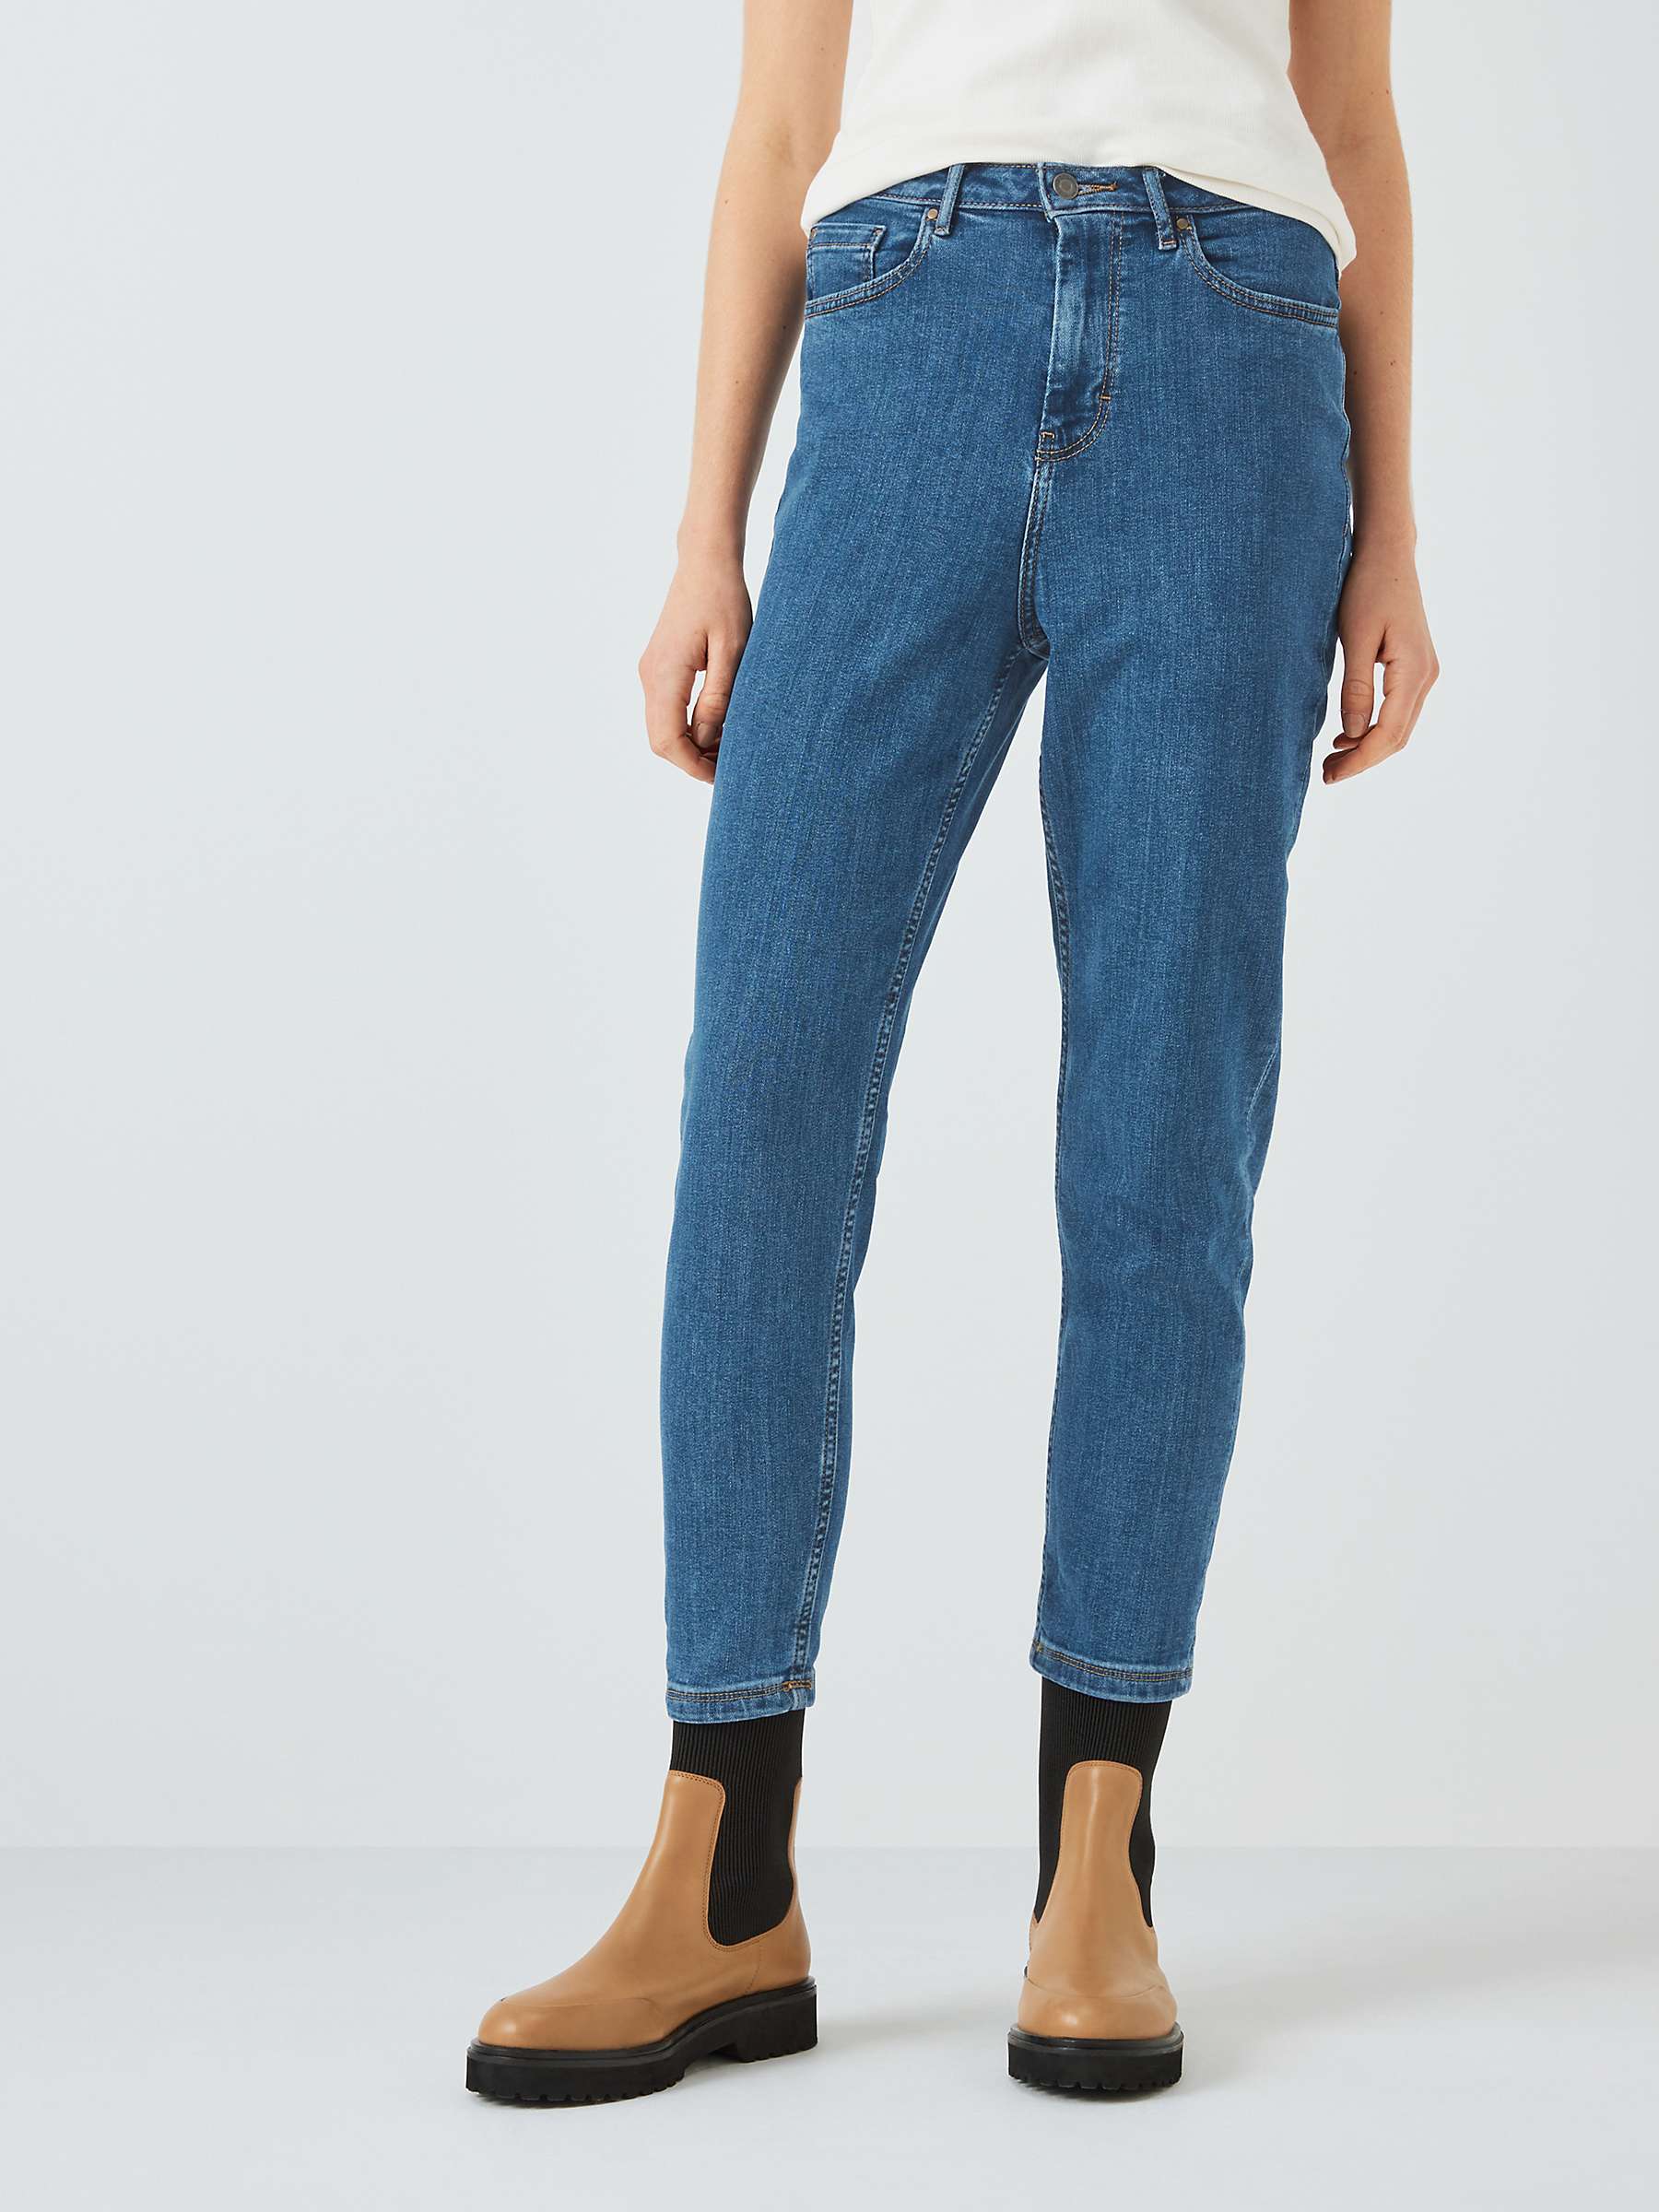 Buy John Lewis ANYDAY Hoxton Mom Jeans Online at johnlewis.com